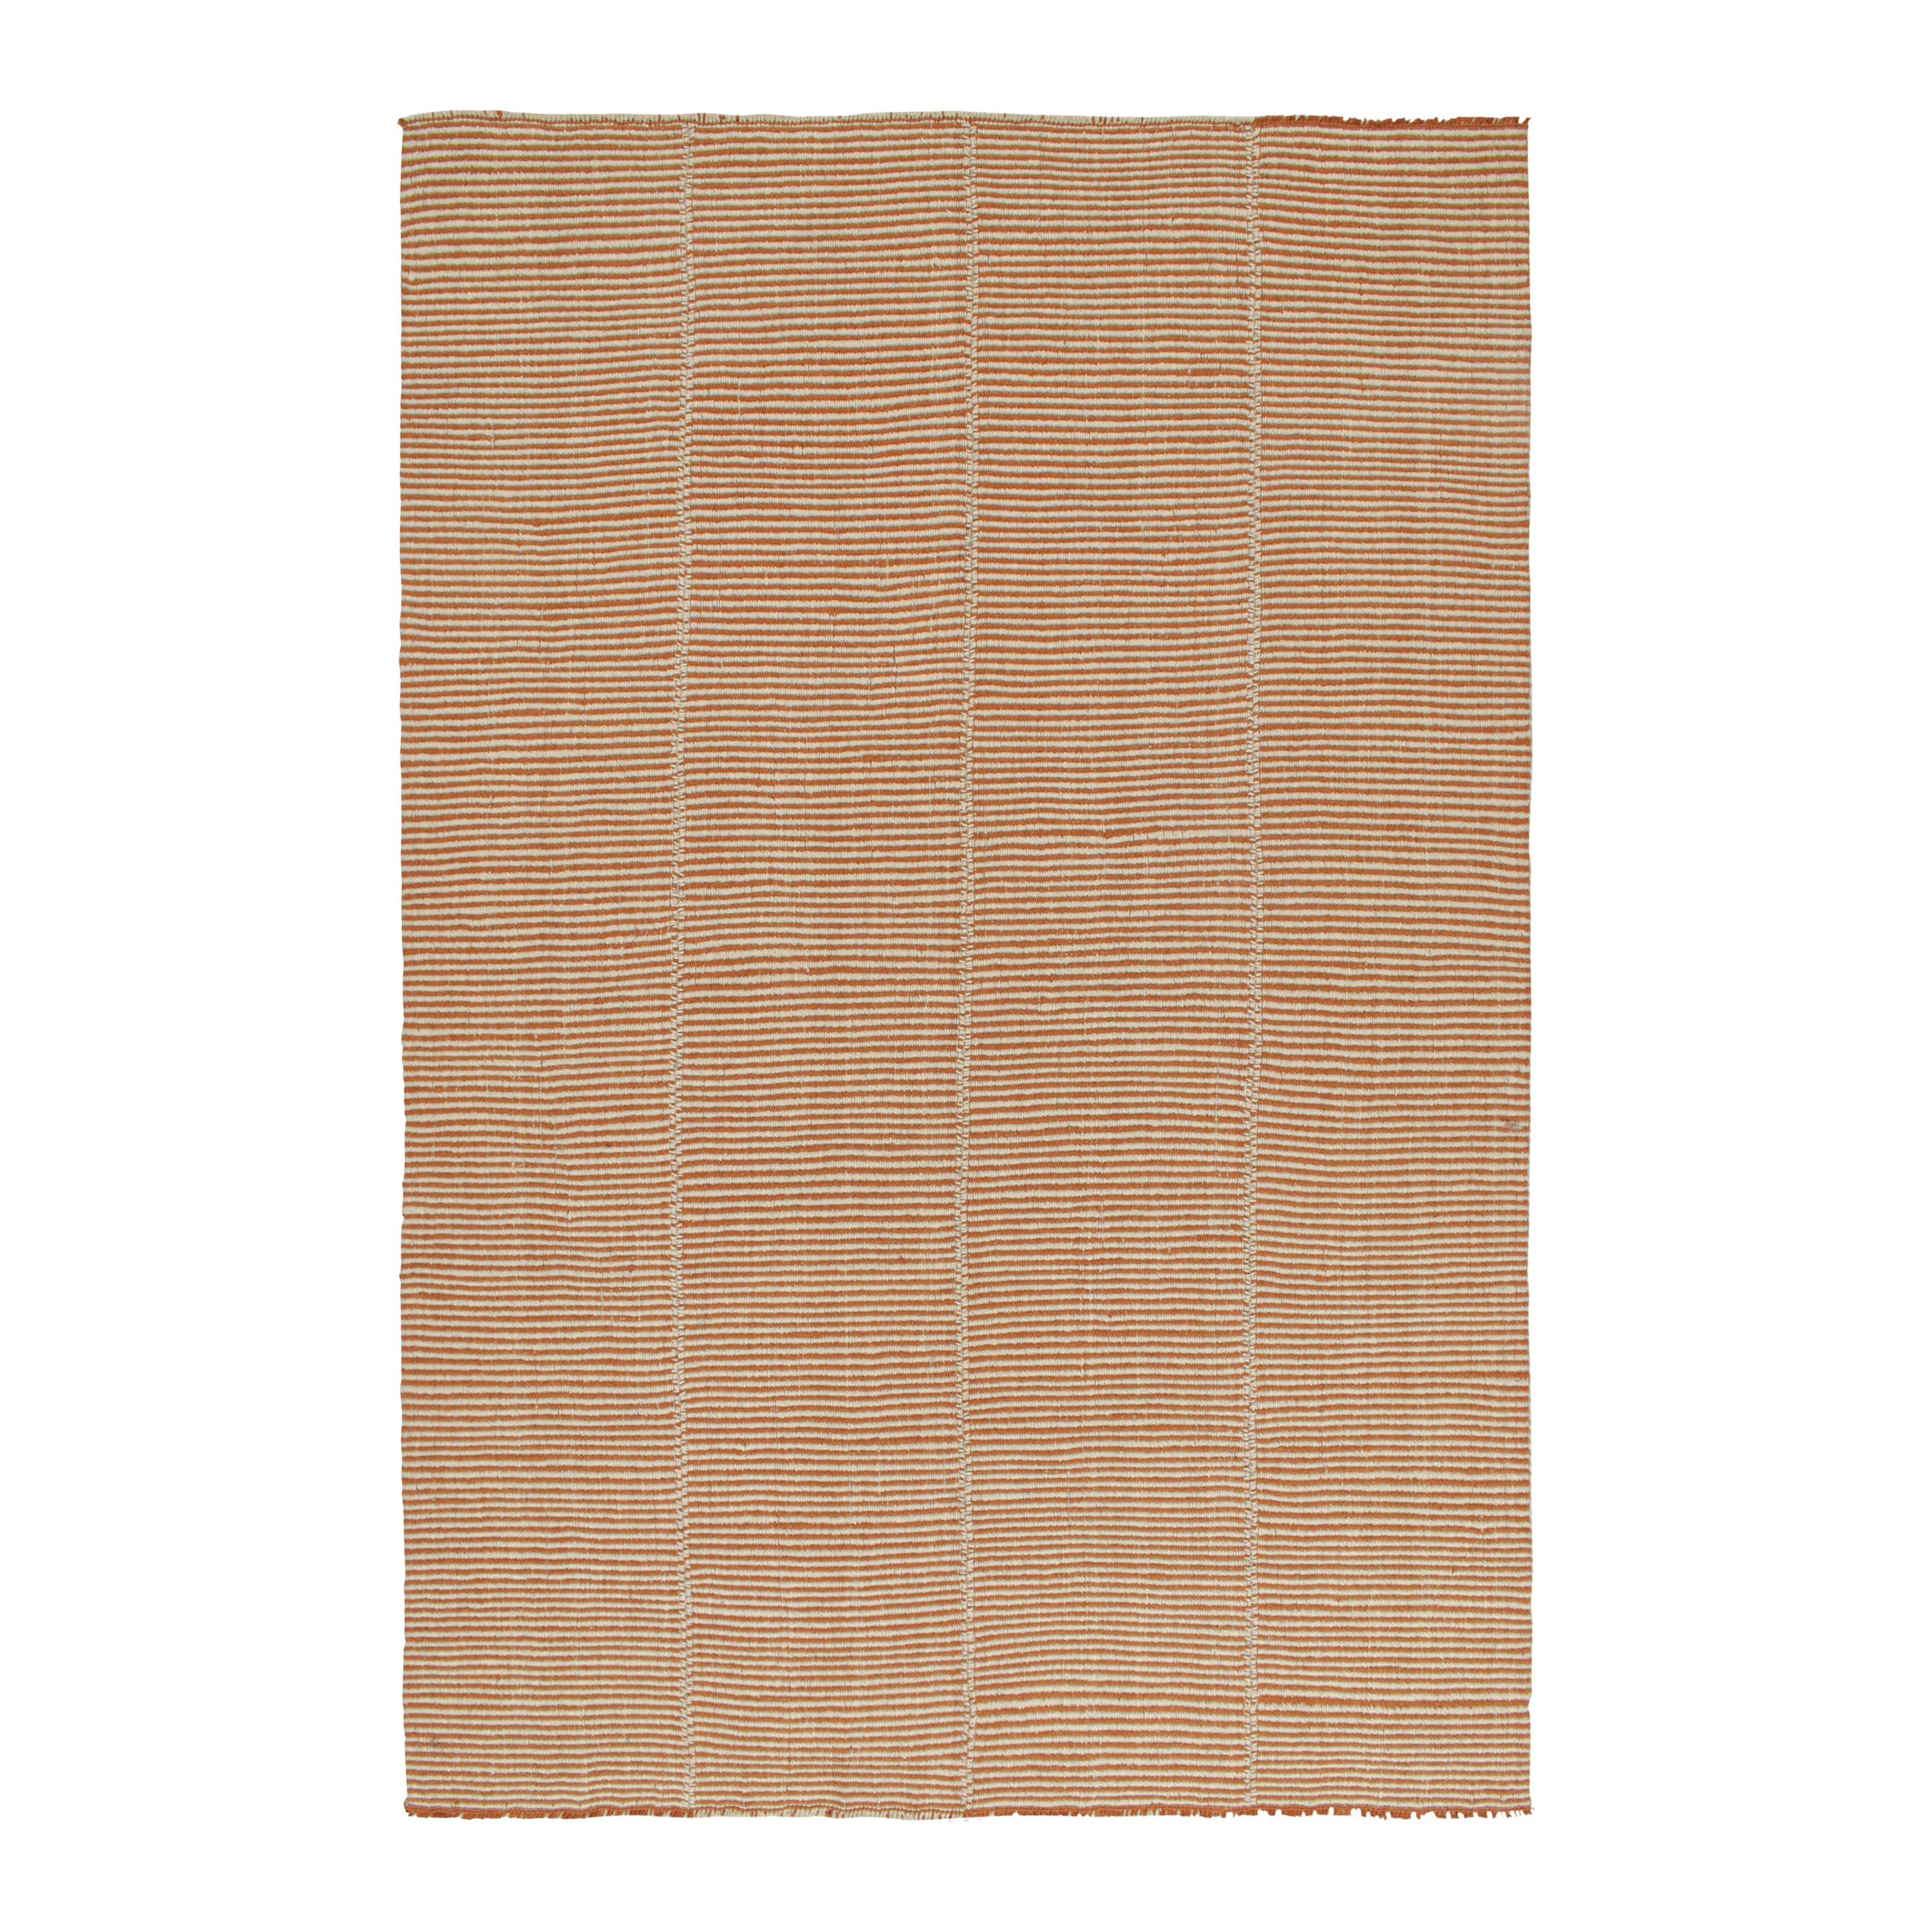 Rug & Kilim’s Contemporary Kilim in Rust with Off-White Notes